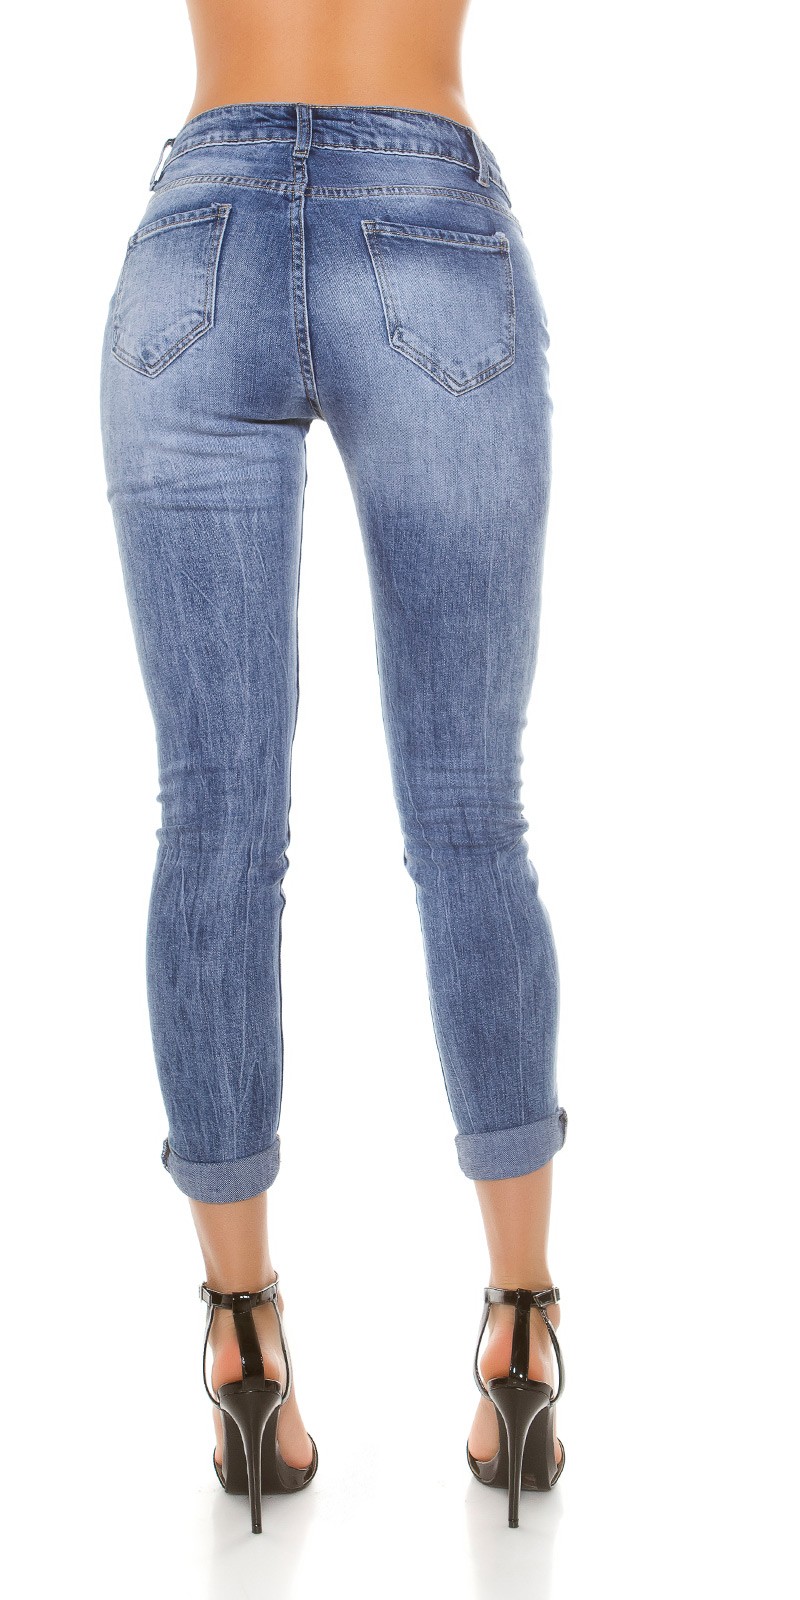 Jeans 7-8 6